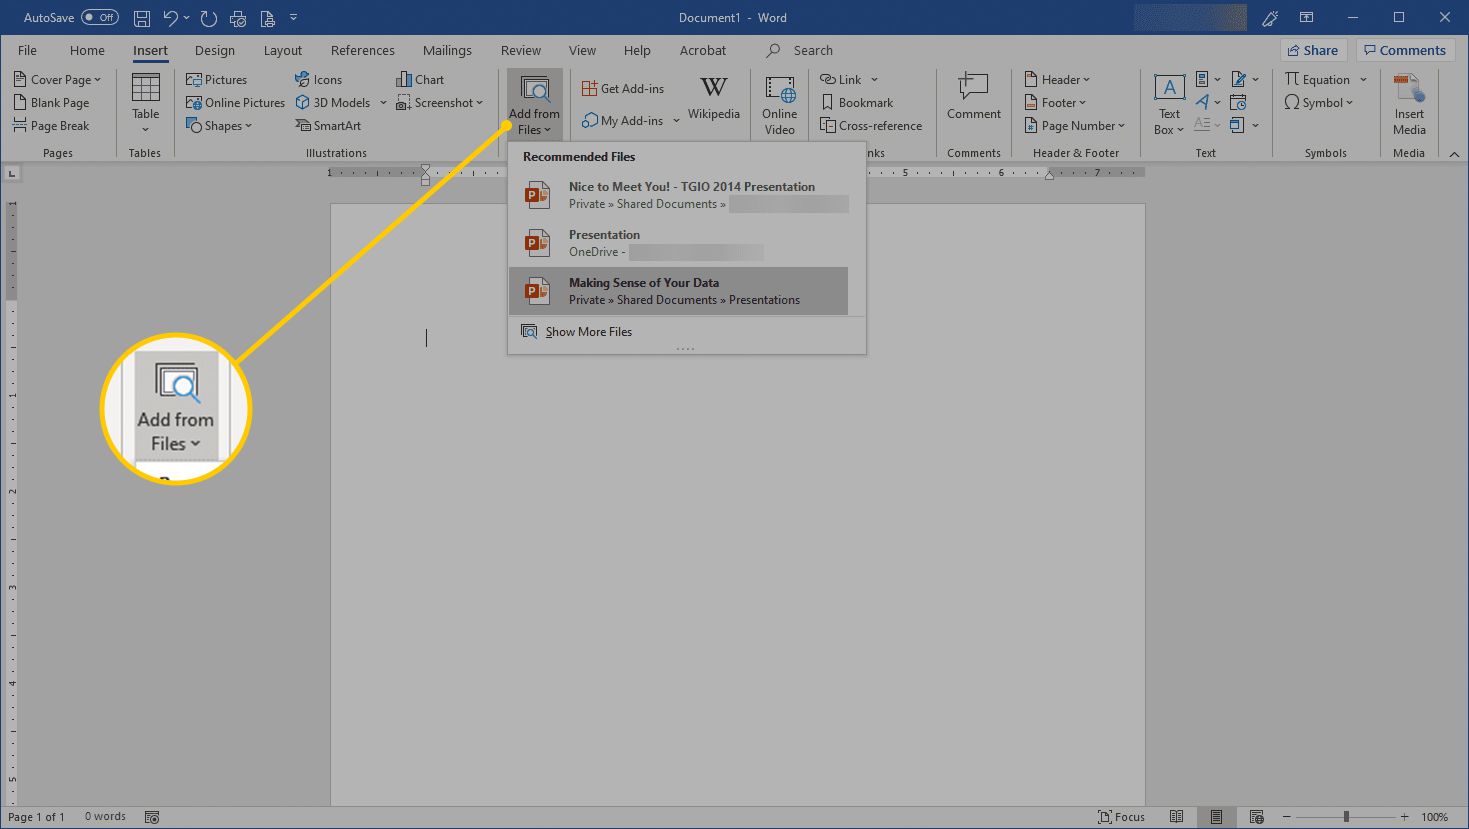 How To Add New Slide In Microsoft Word